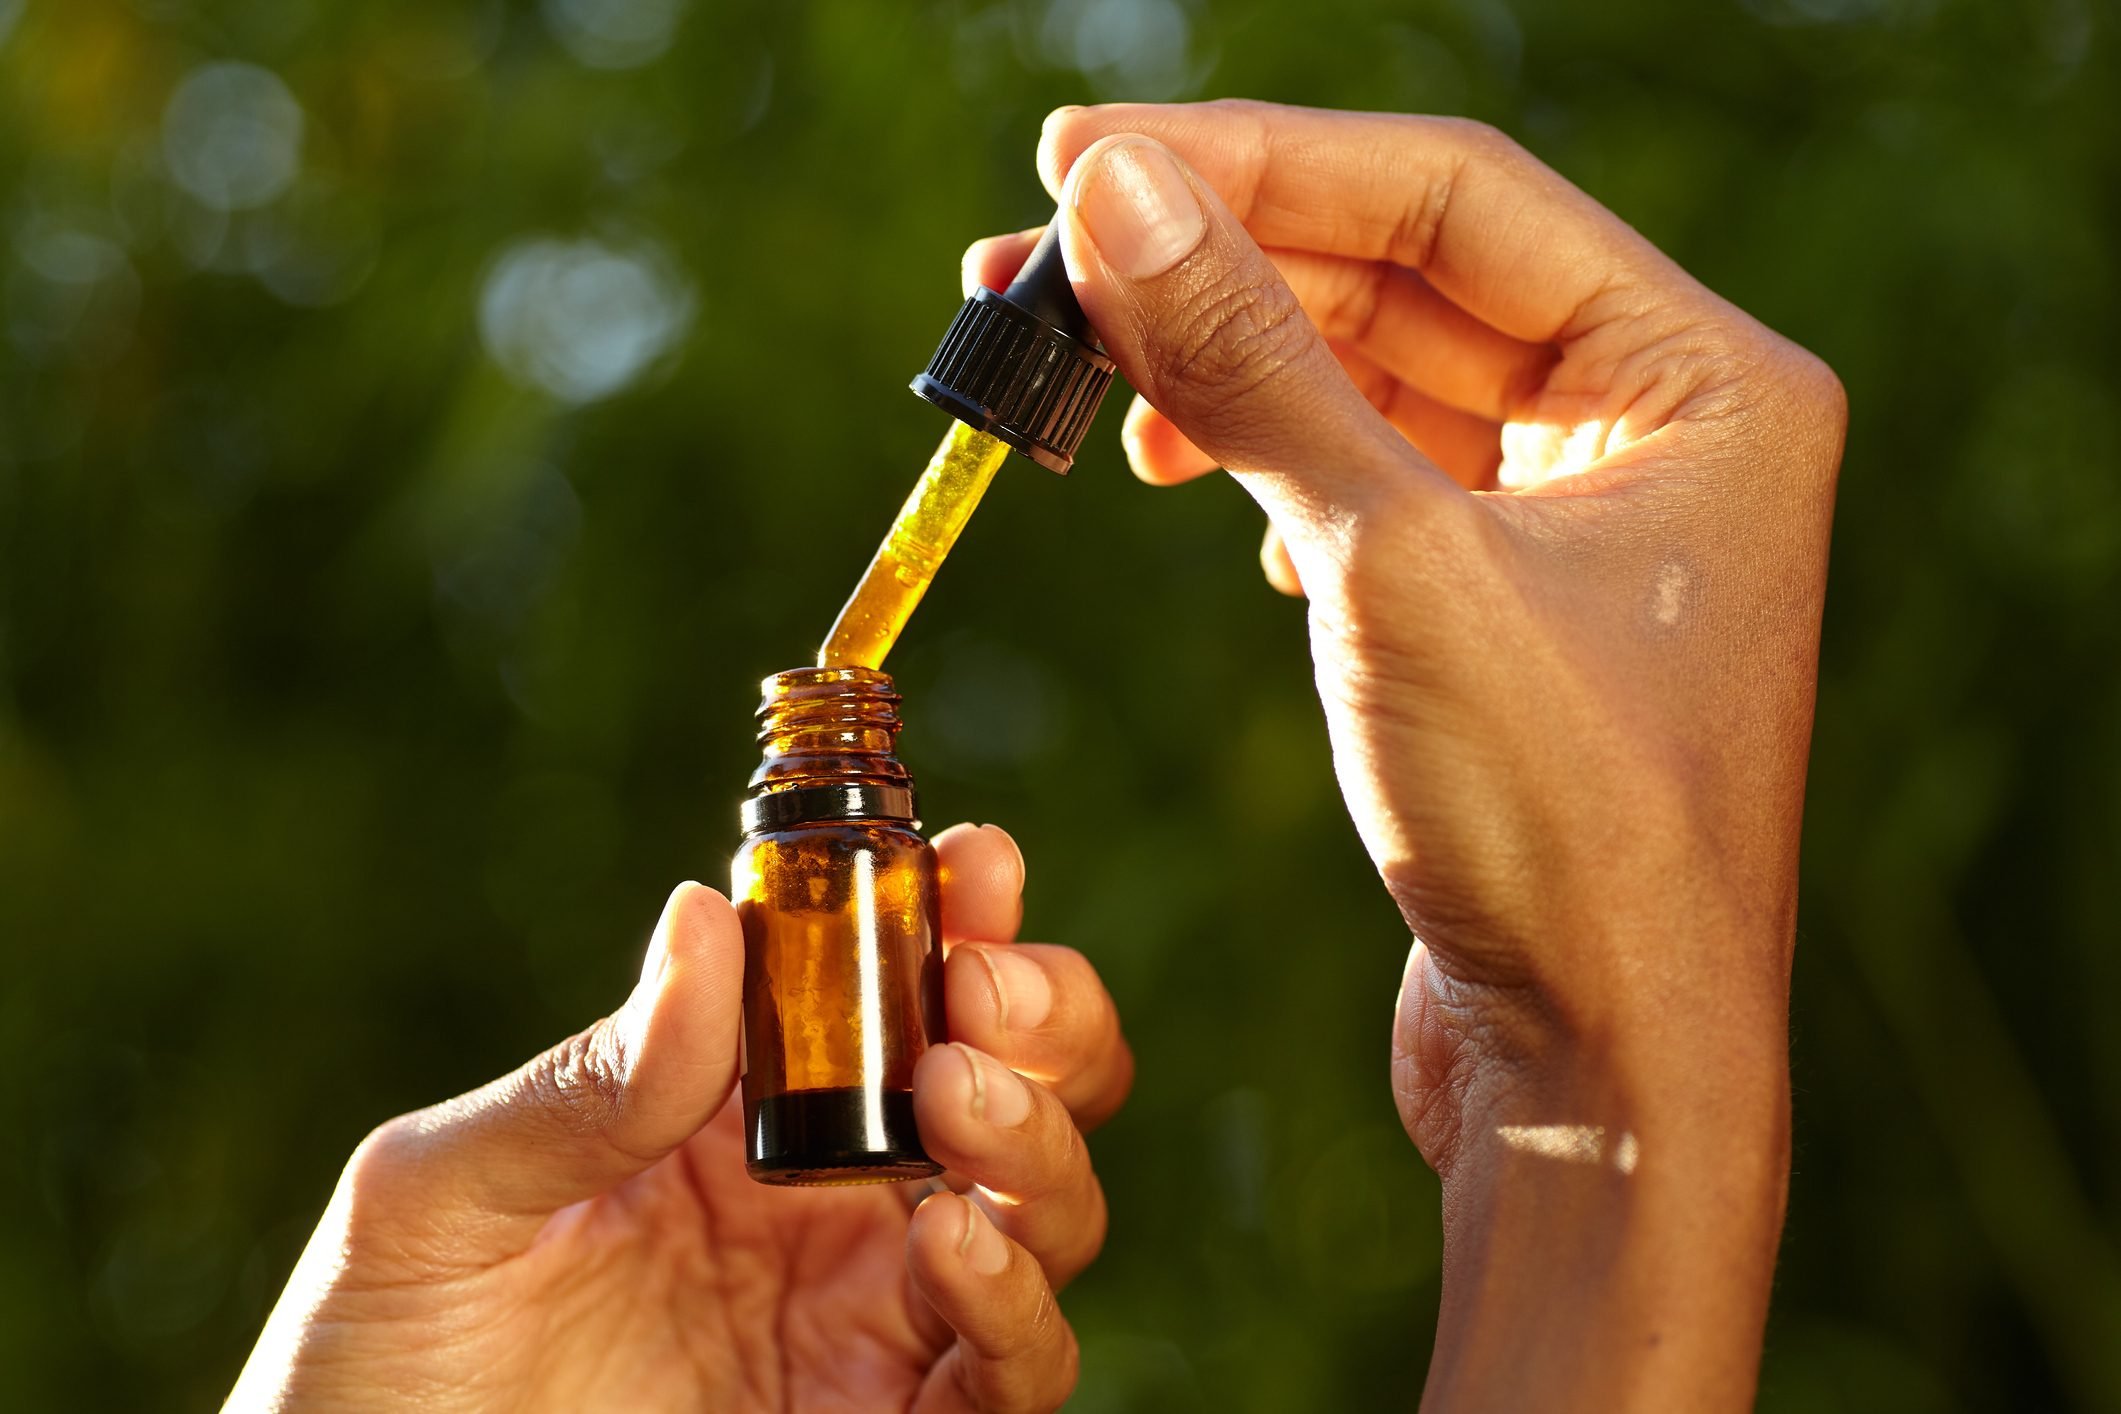 how long does it take for cbd oil to work?